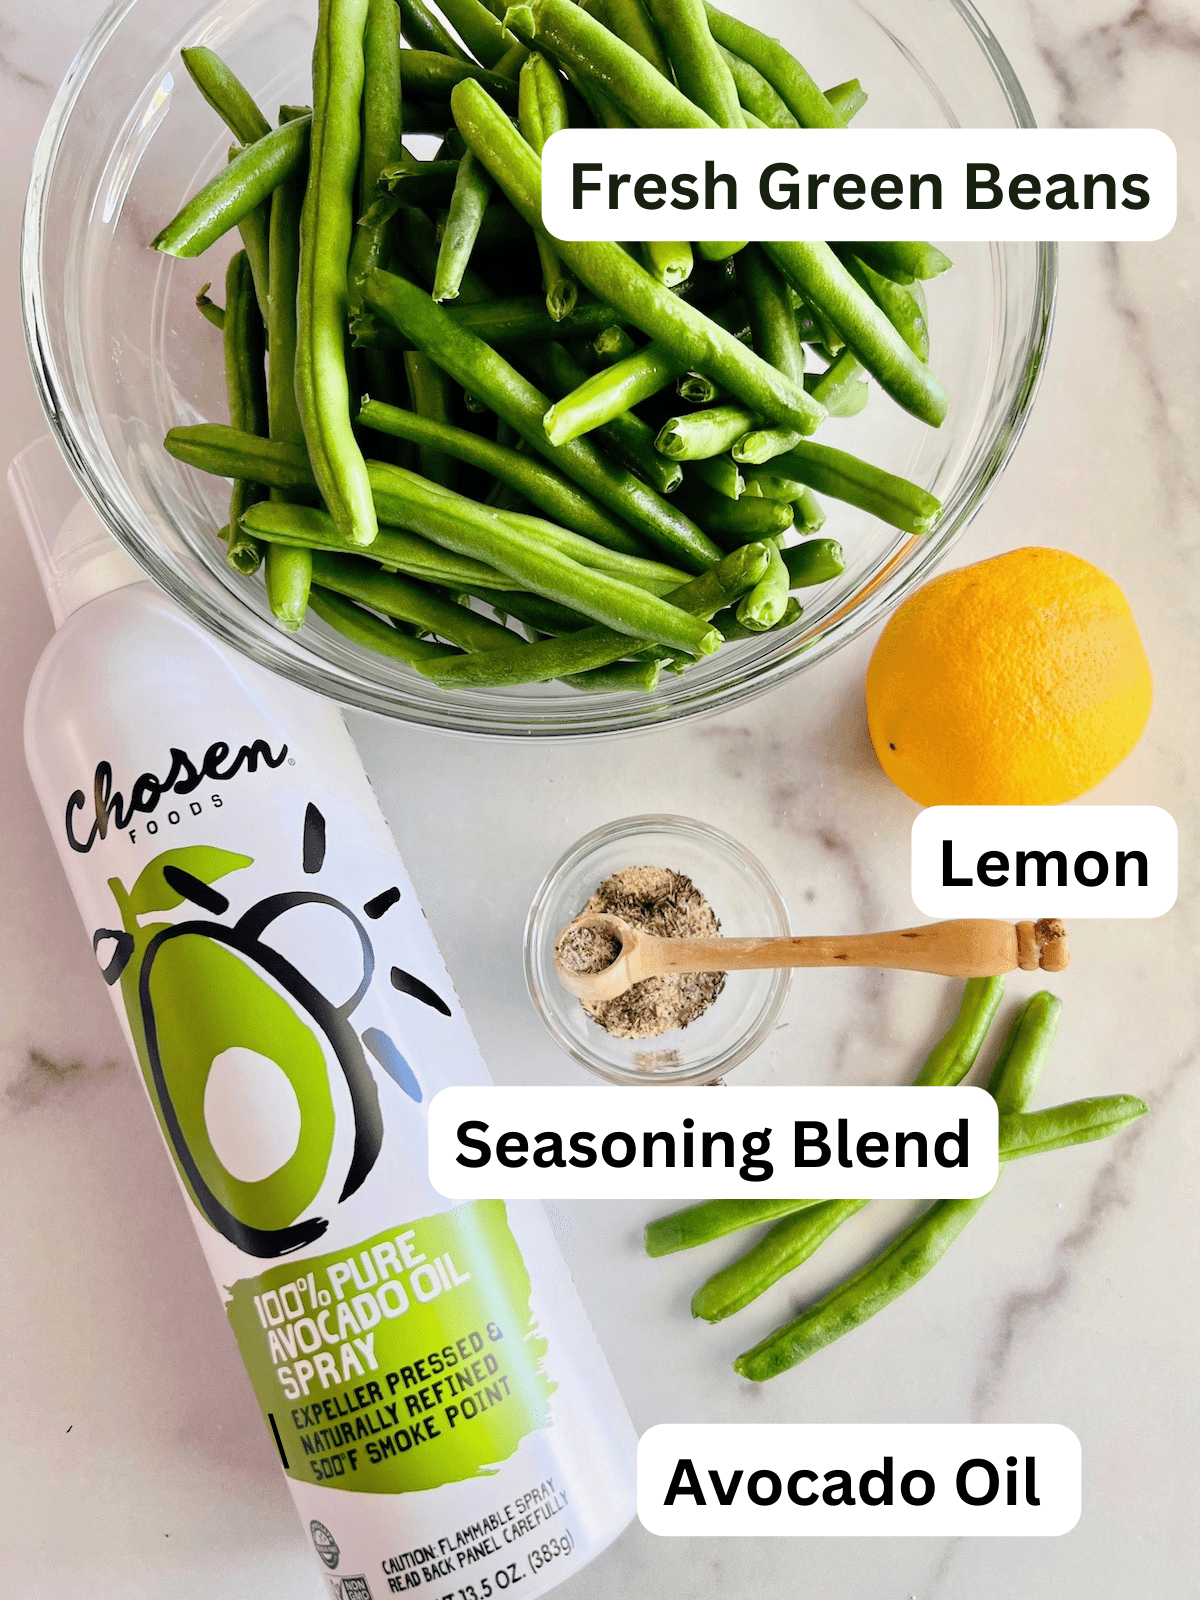 Air Fryer Green Beans Ingredients labeled.